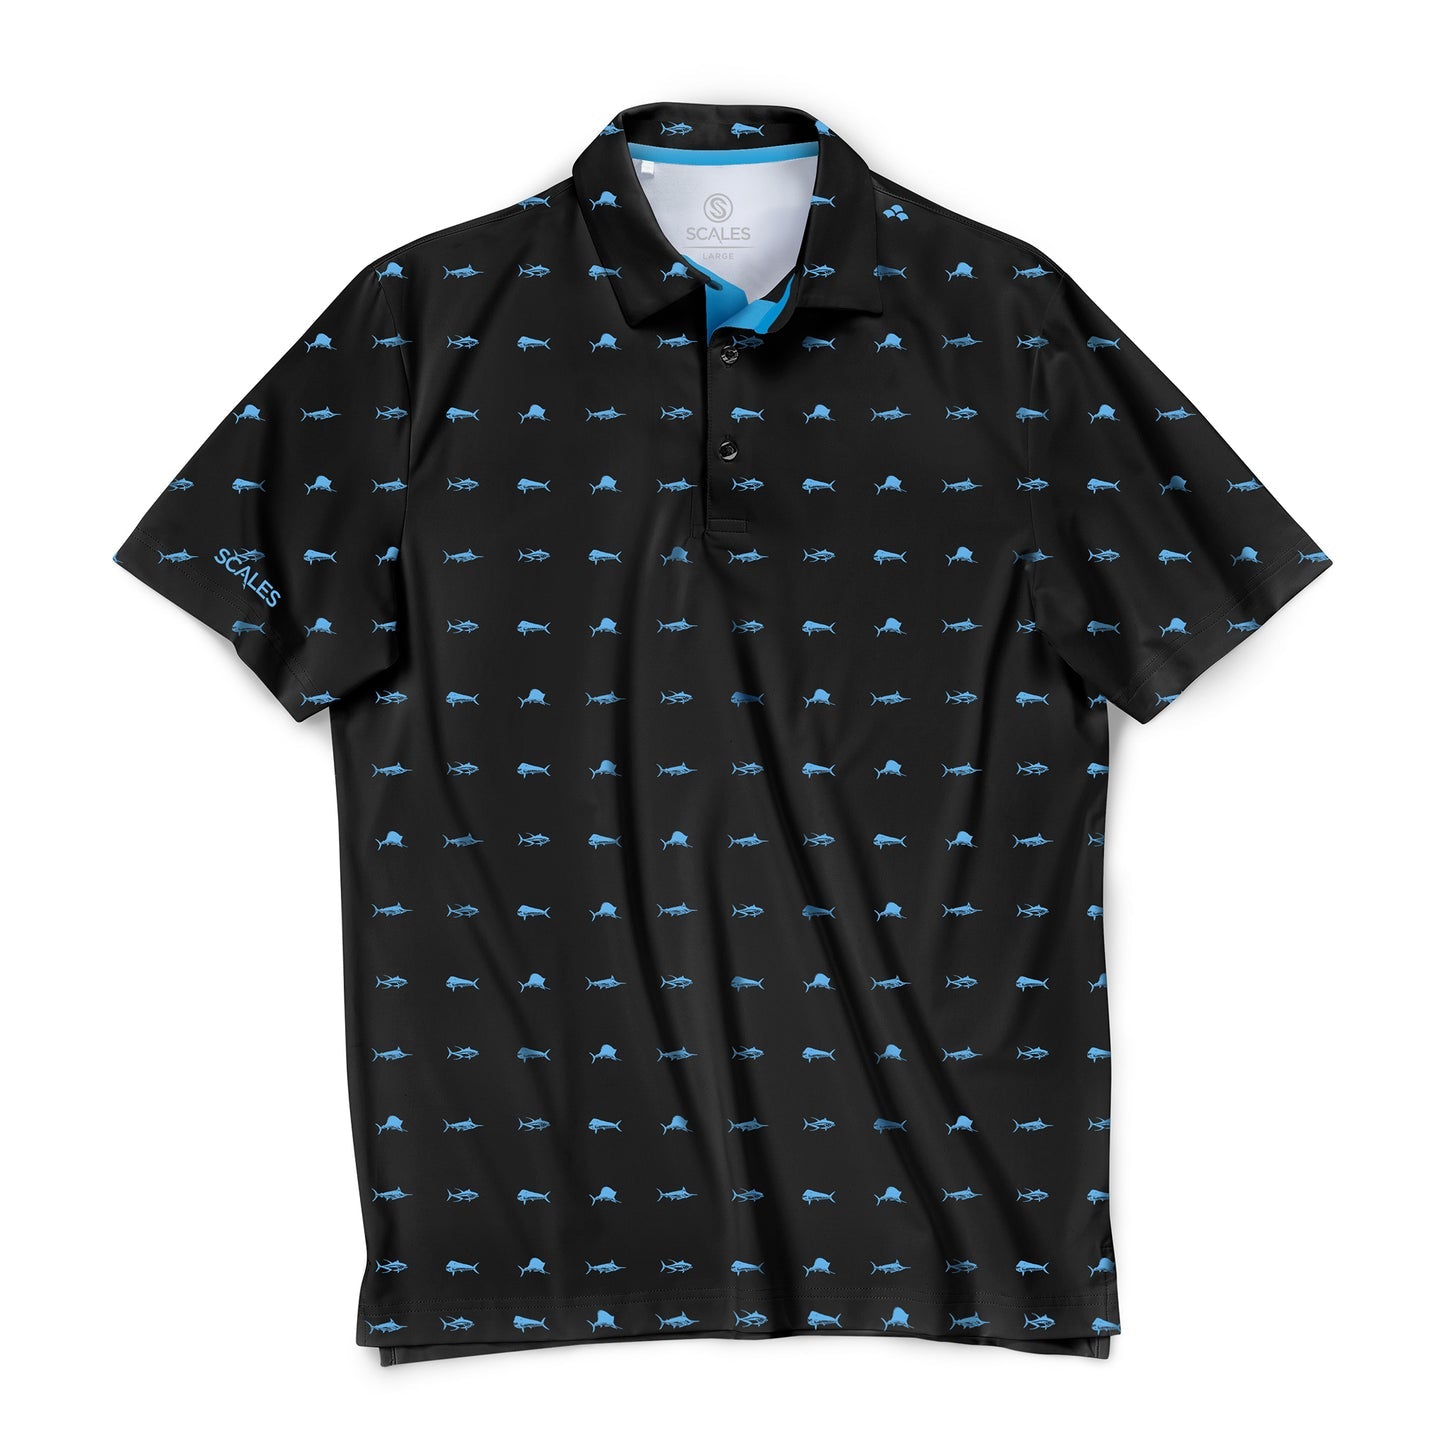 SCALES Clean Fish Polo